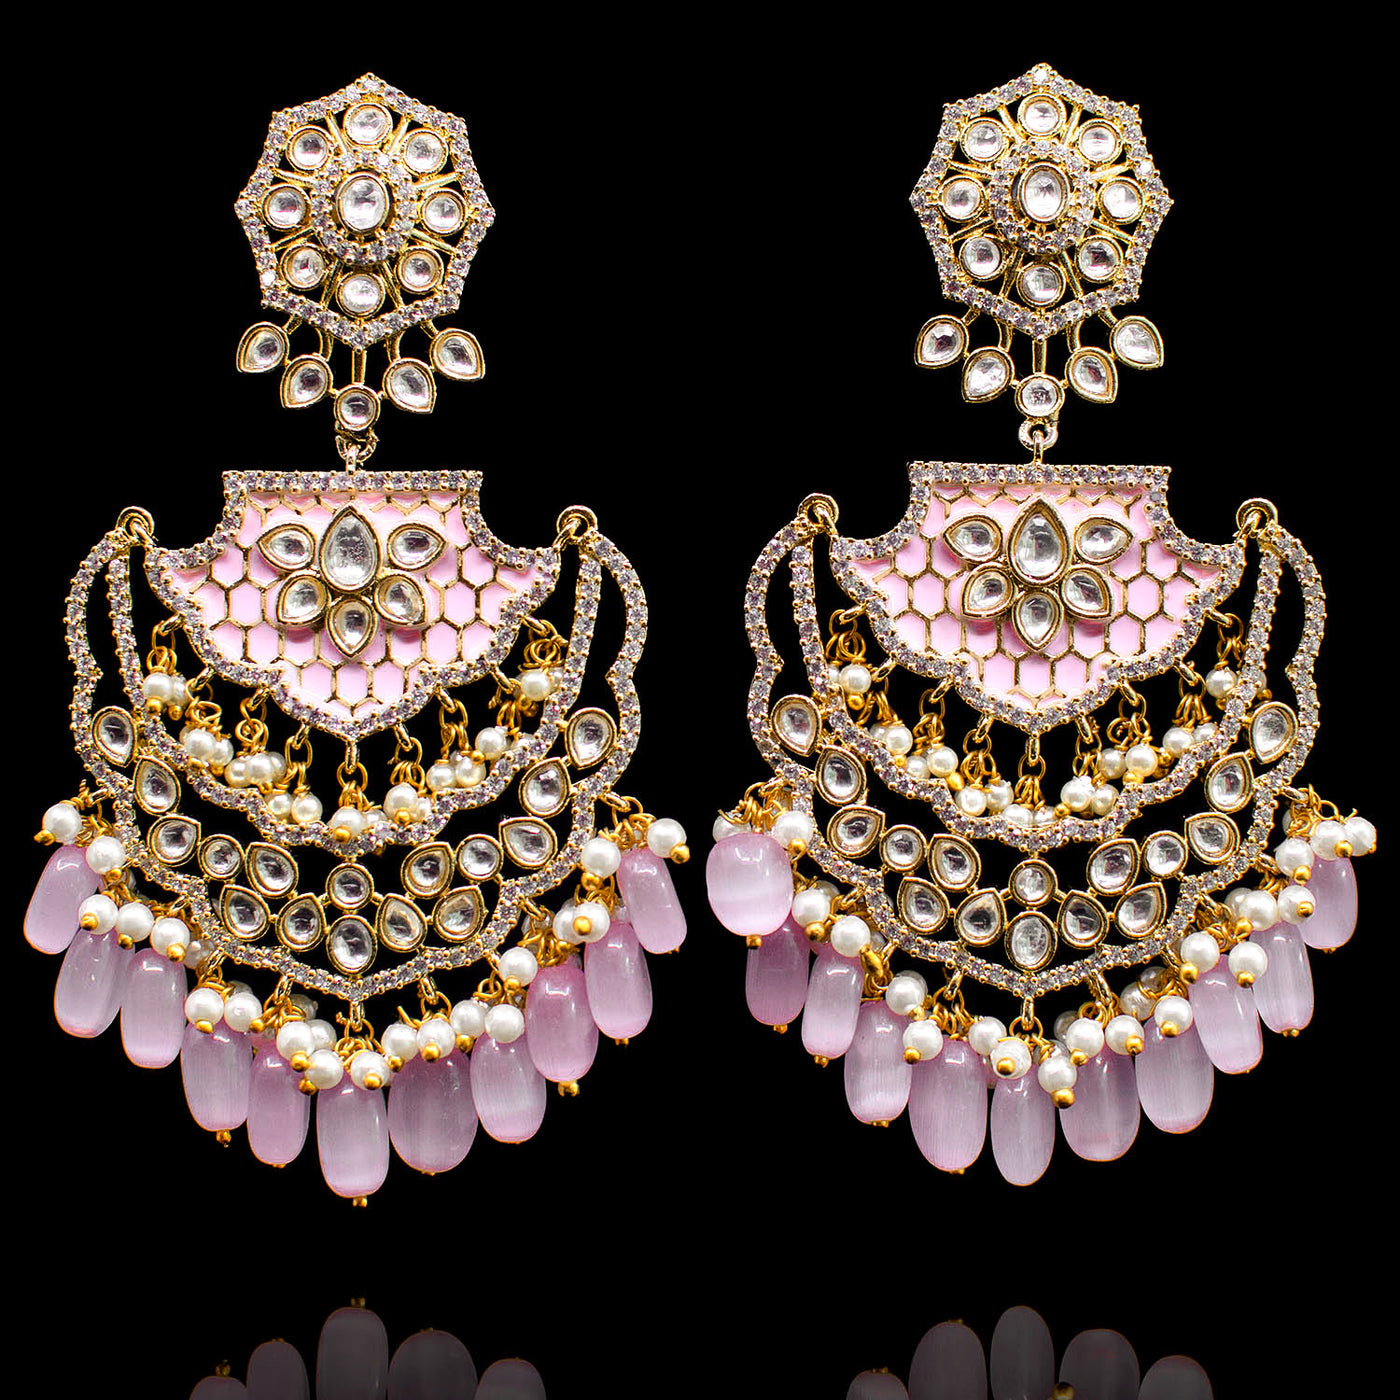 Tanu Earrings - Available in 3 Colors